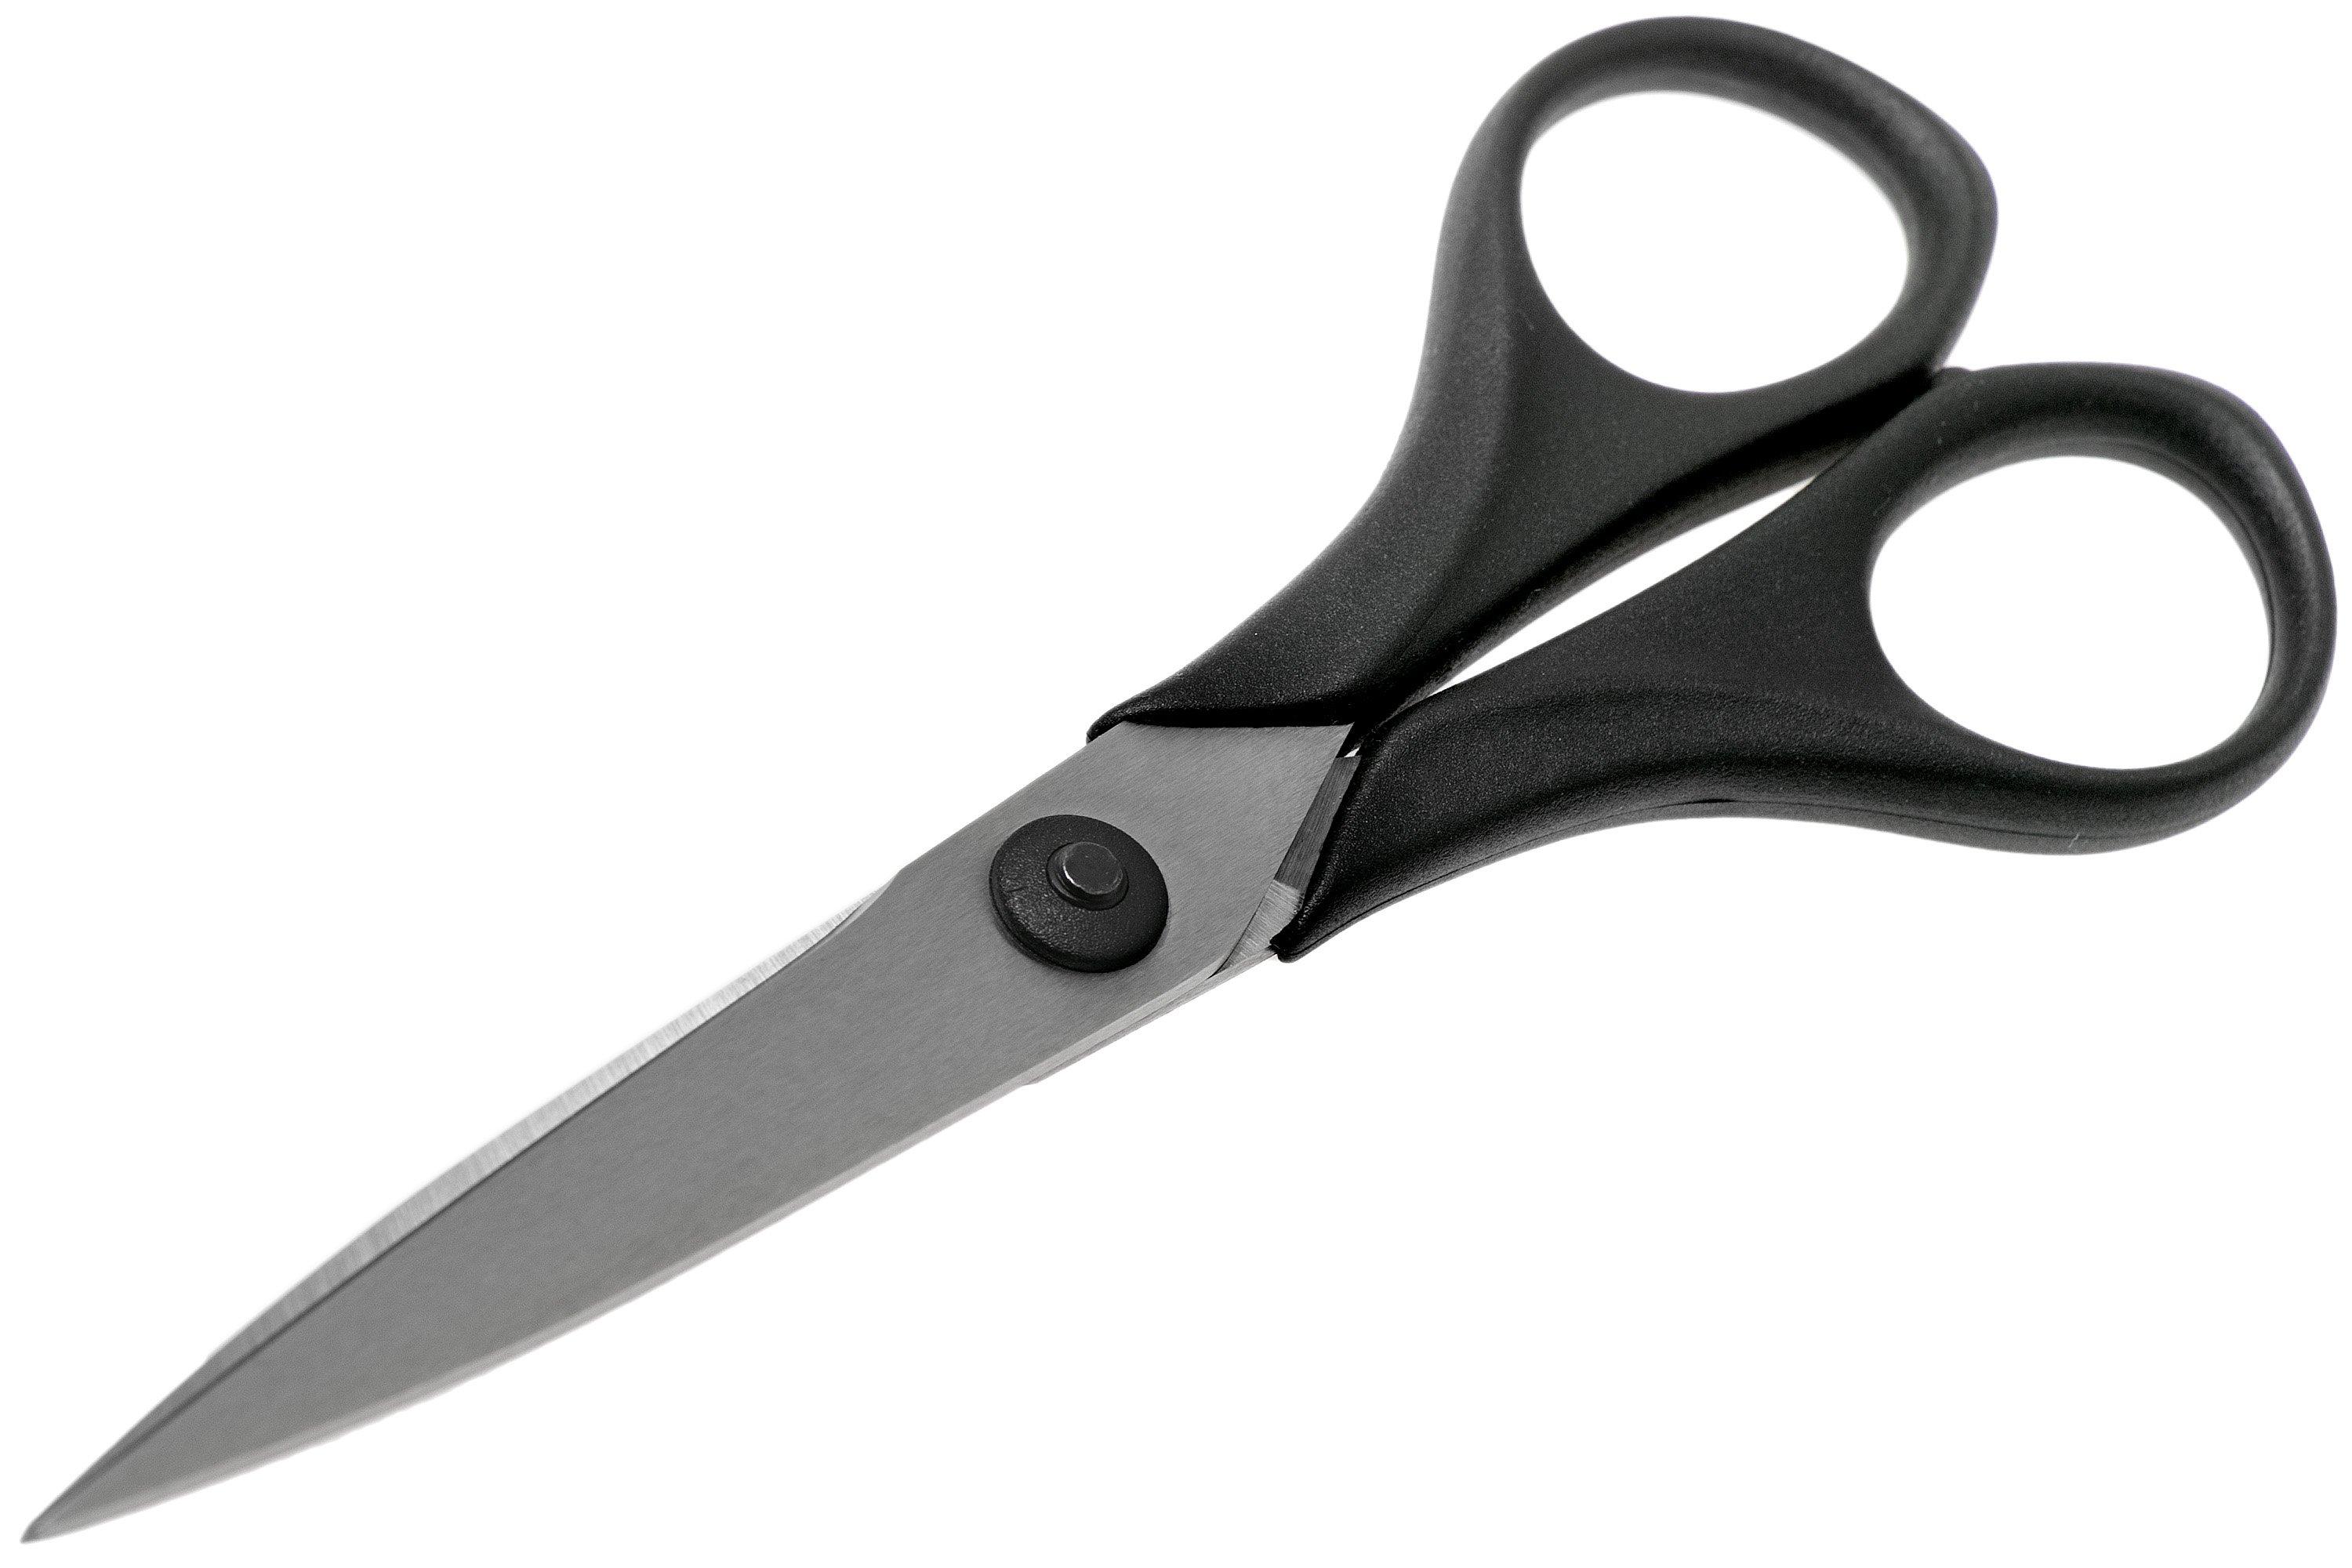 Victorinox Stainless Steel 8.0986.16, 16 cm household scissors |  Advantageously shopping at